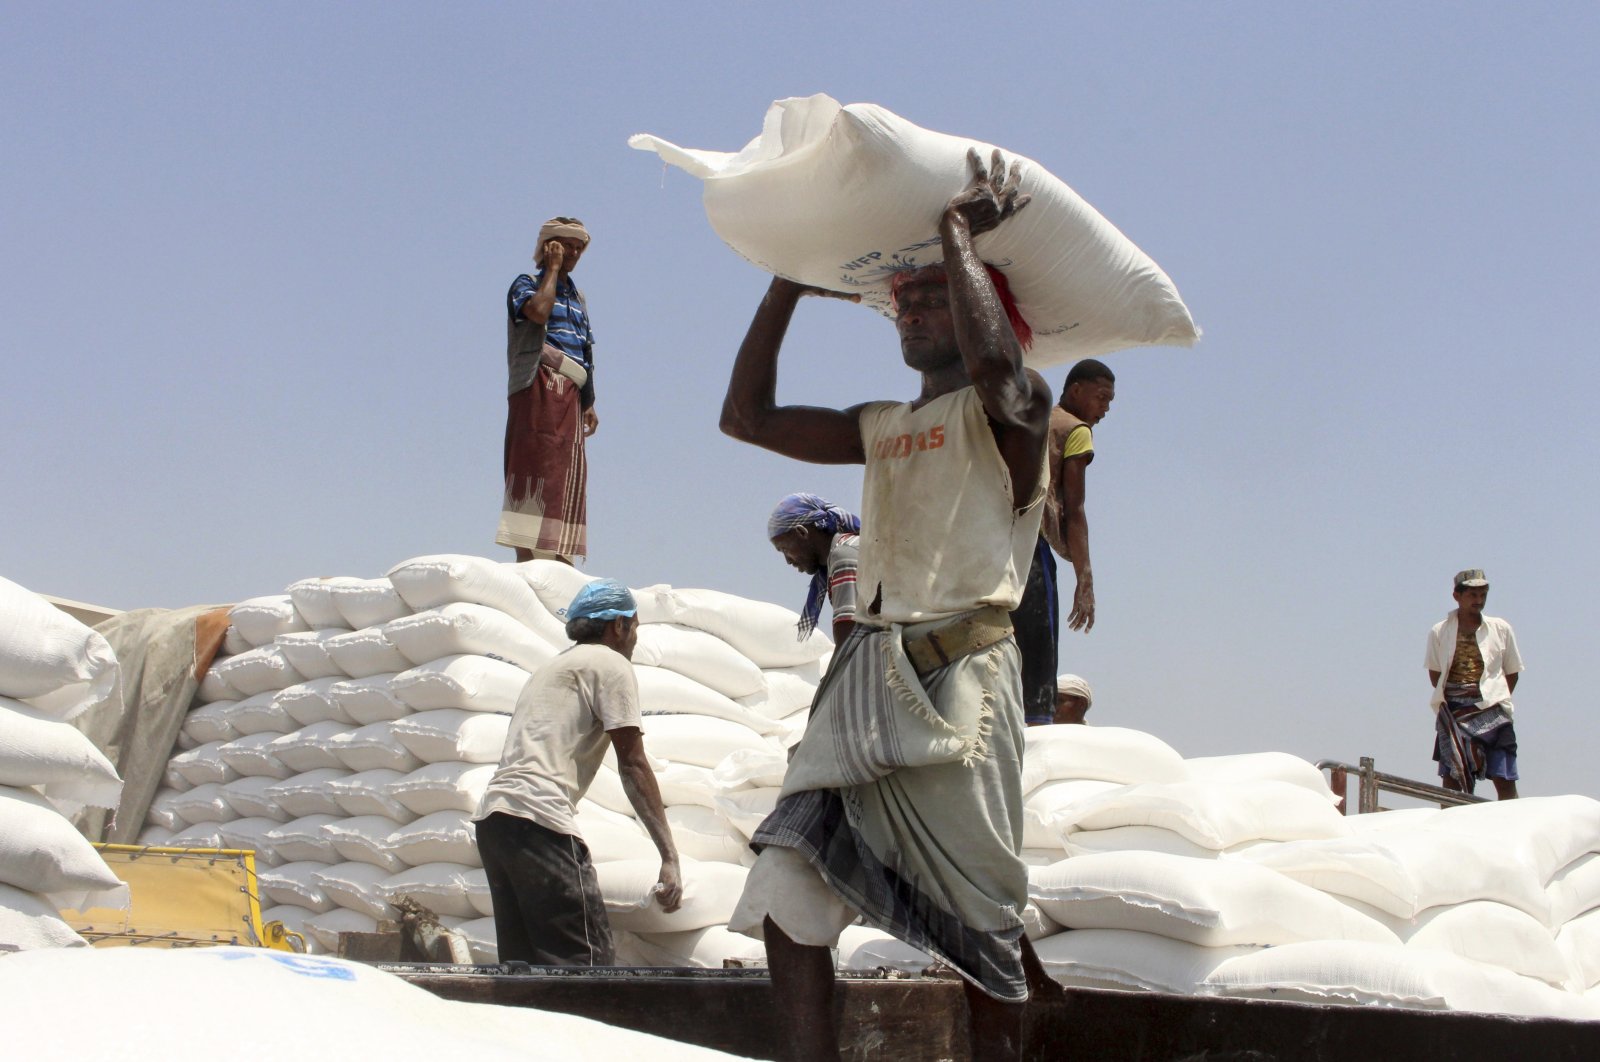 In this file photo, men deliver U.N. World Food Programme (WFP) aid in Aslam, Hajjah, Yemen on Sept. 21, 2018. (AP Photo)